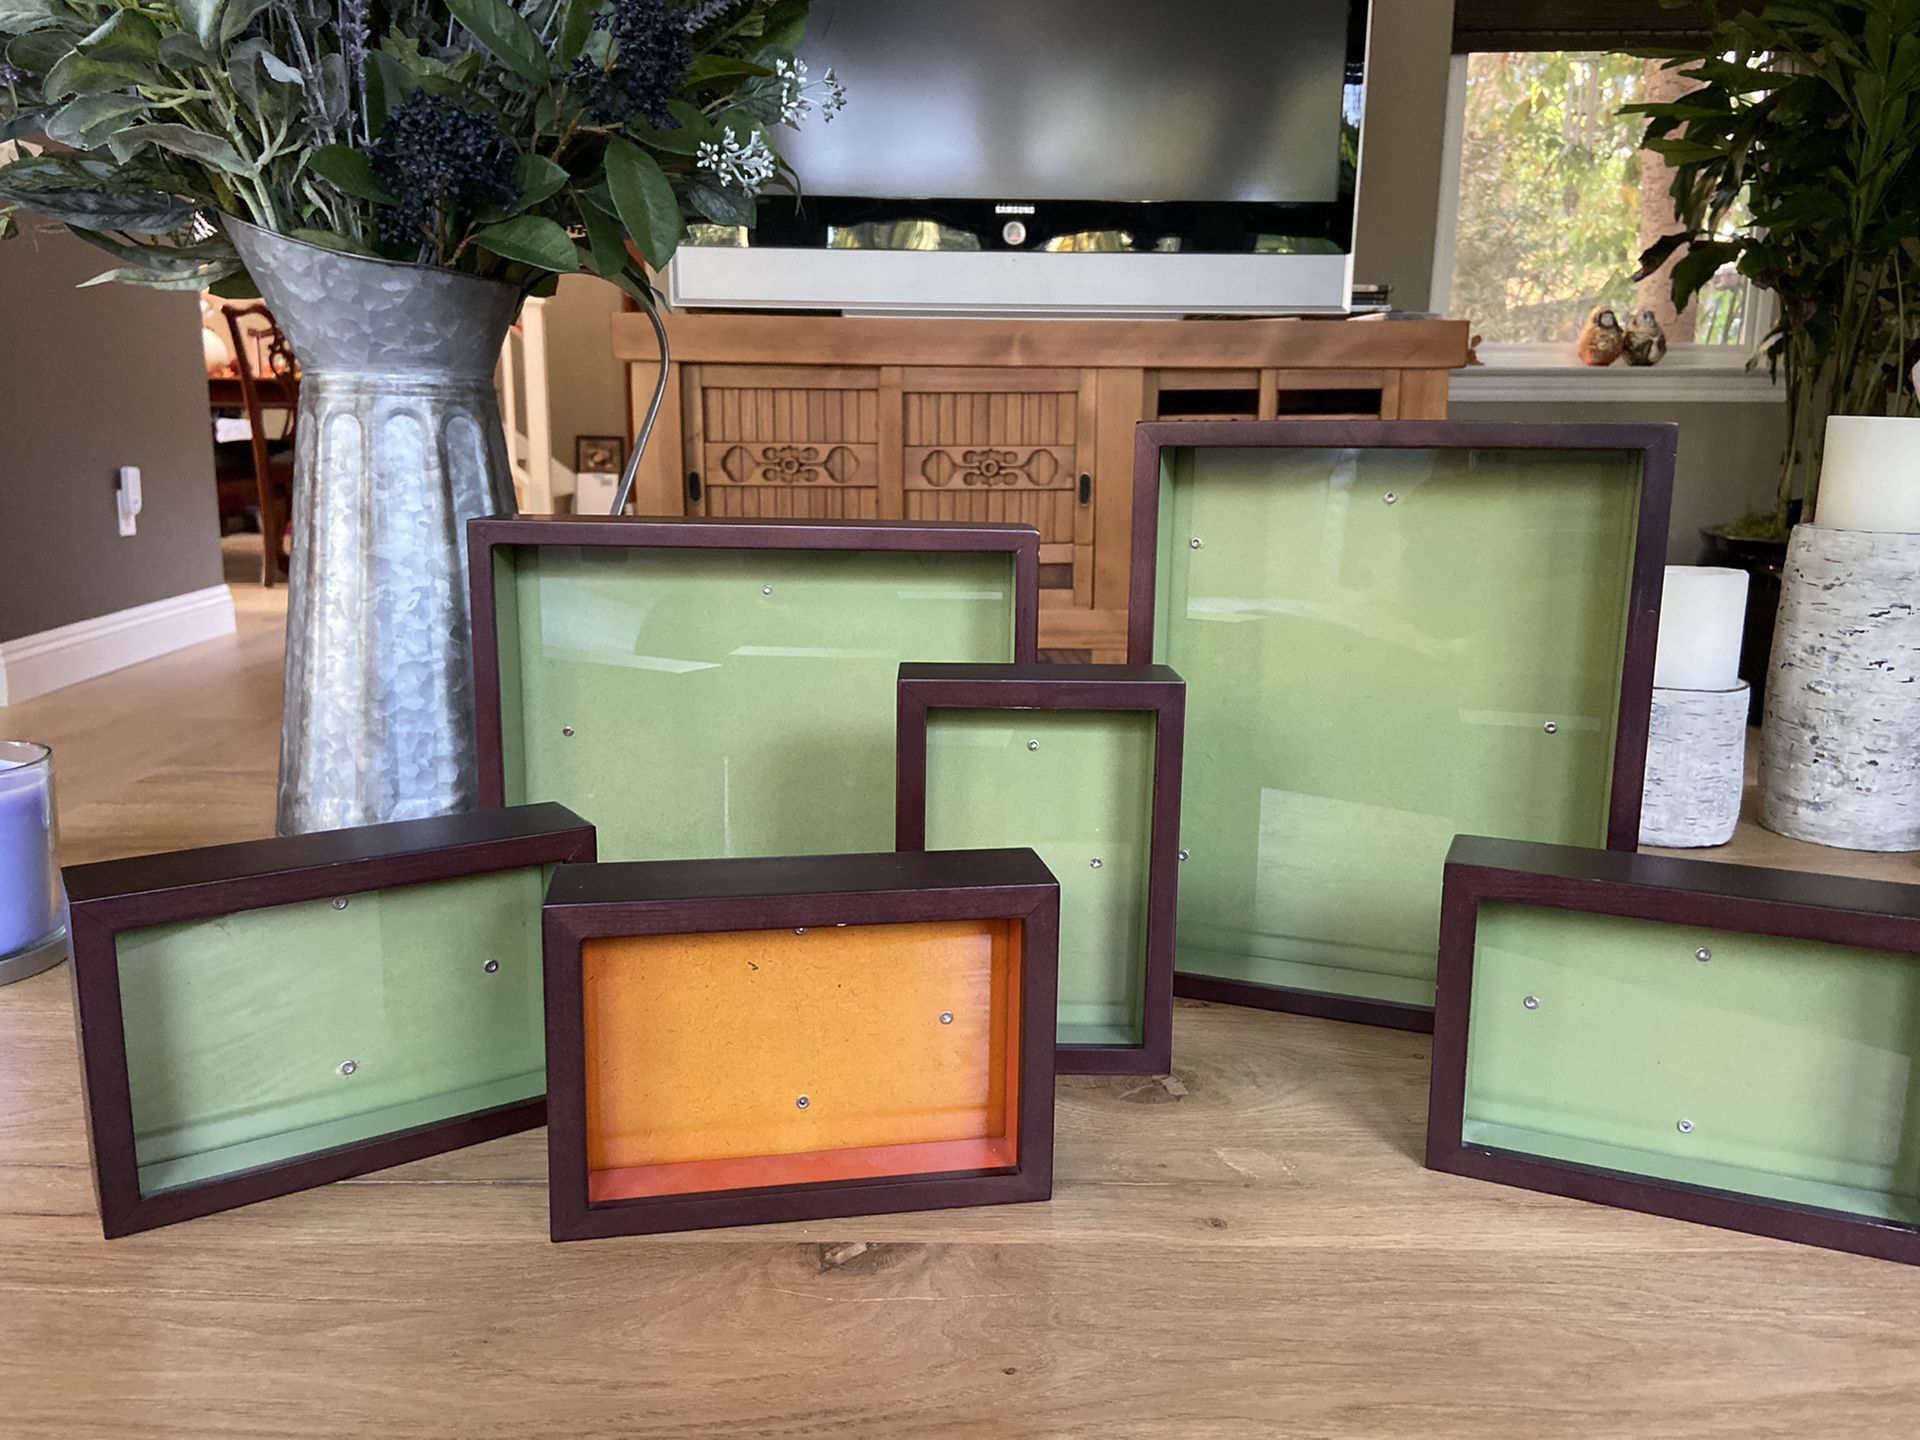 Set of 6 wood and glass picture frames